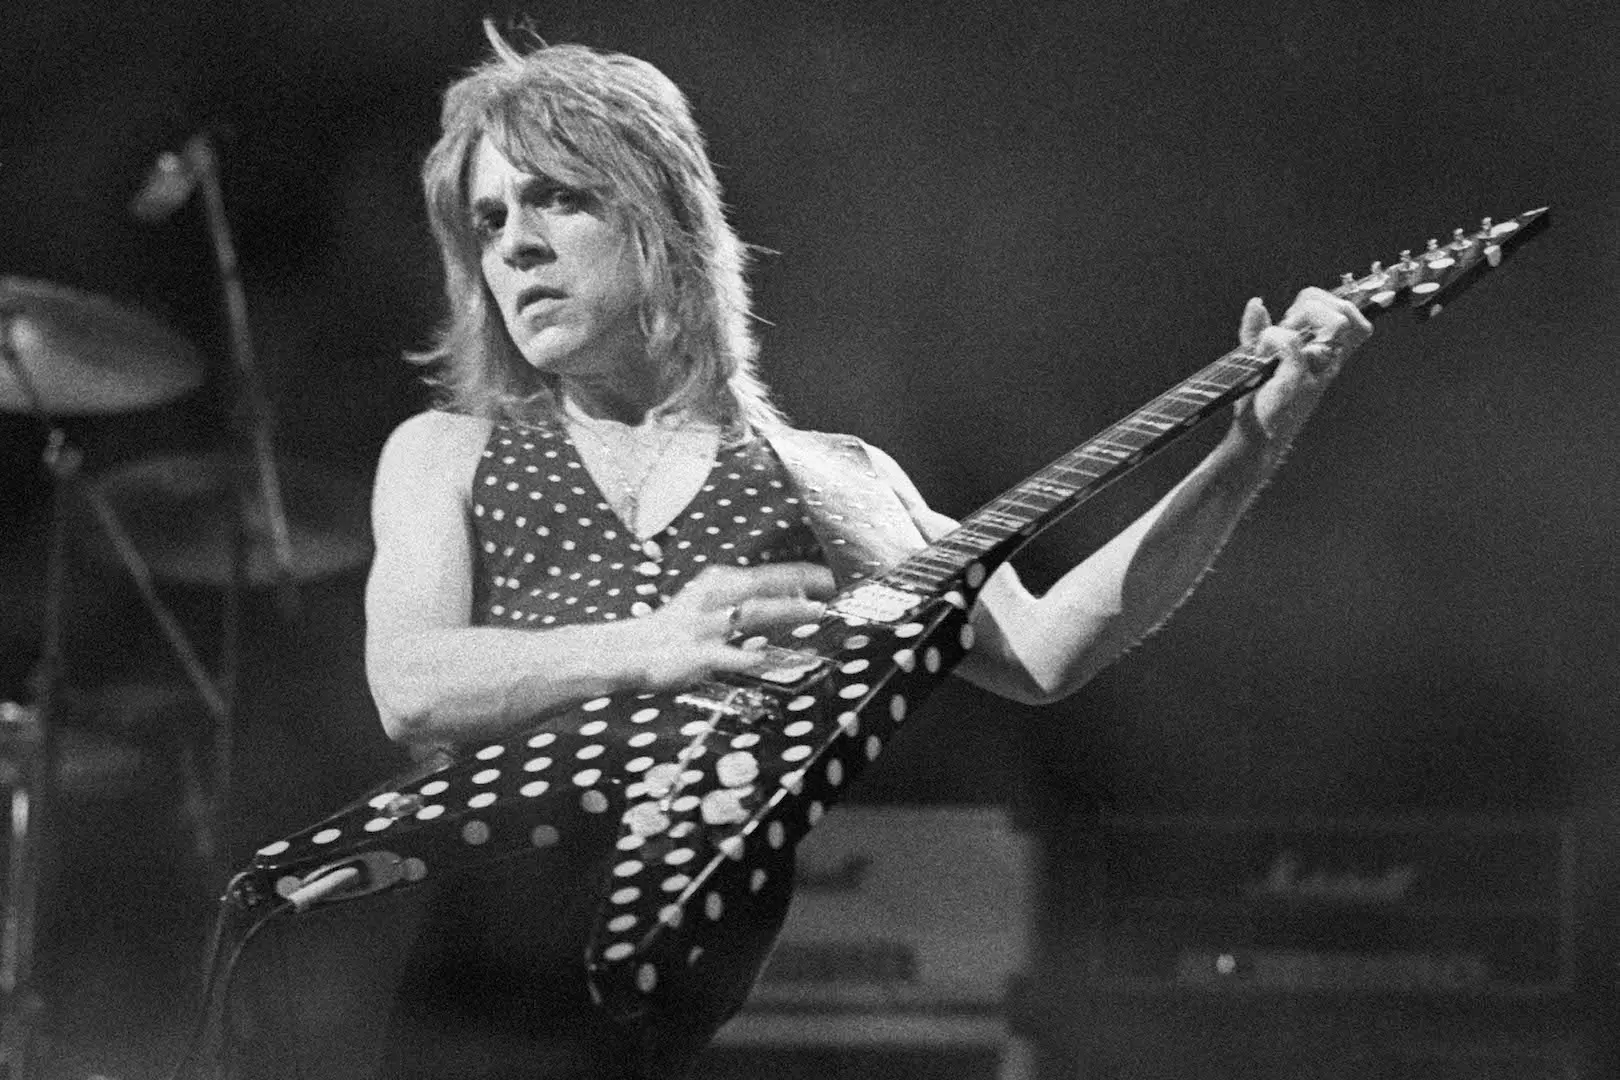 Glenn Tipton Quote: “If you're not enjoying yourself, you can't really look  as if